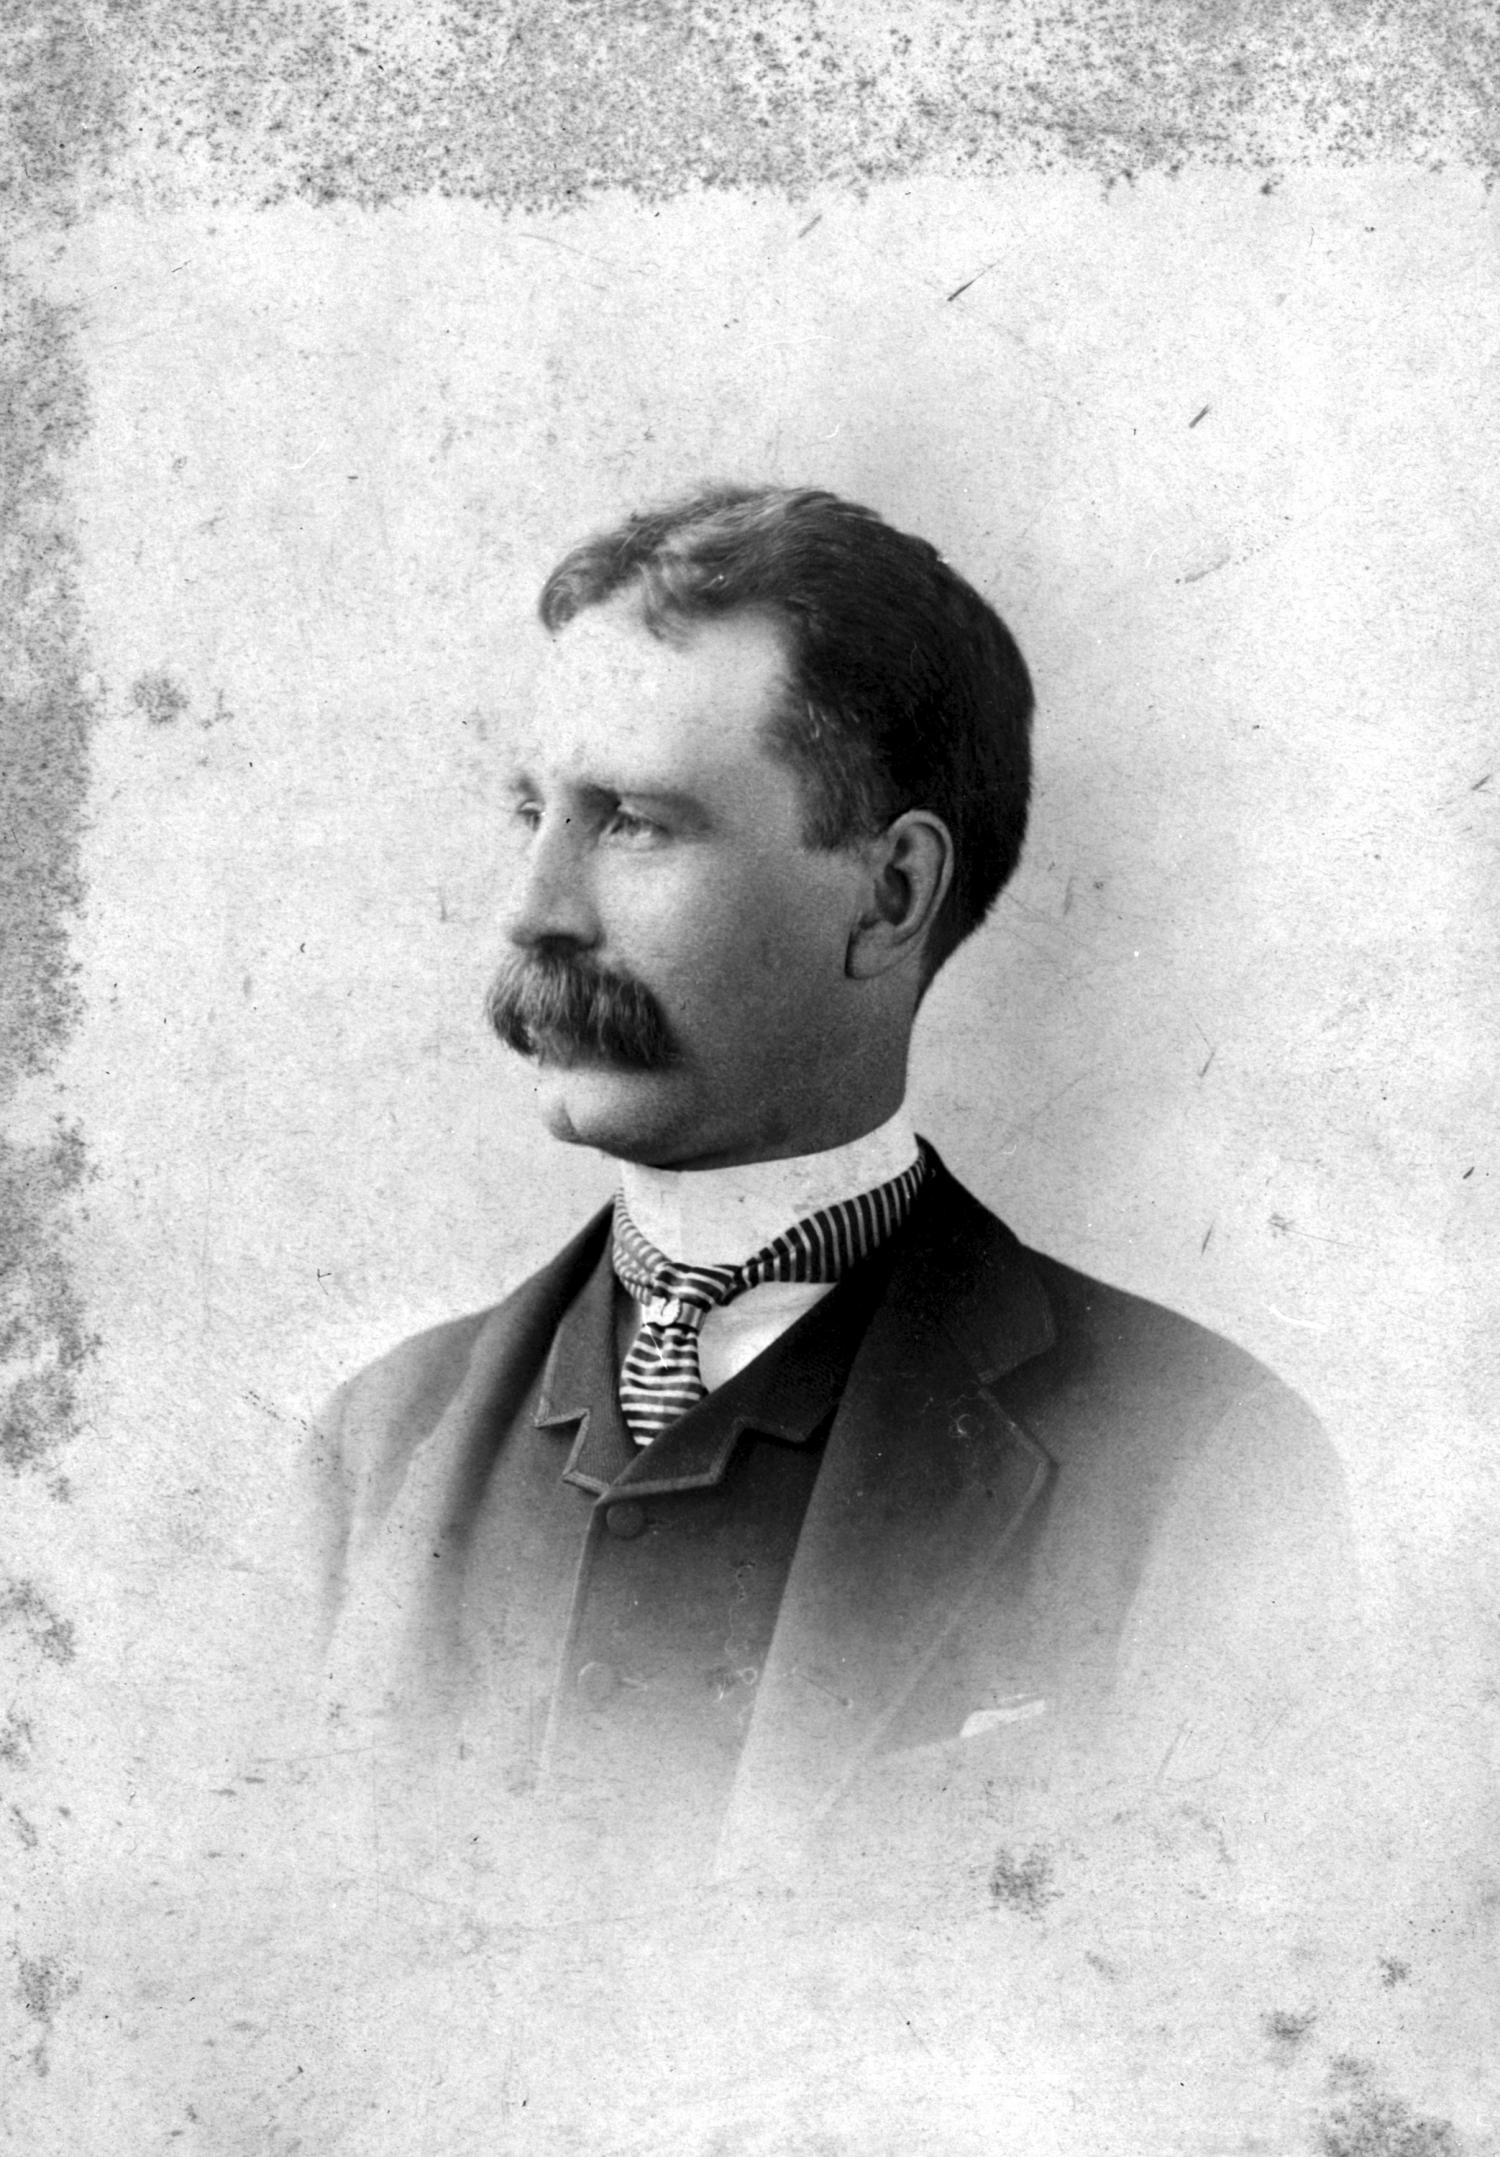 A black and white portrait of Andrew Onderdonk